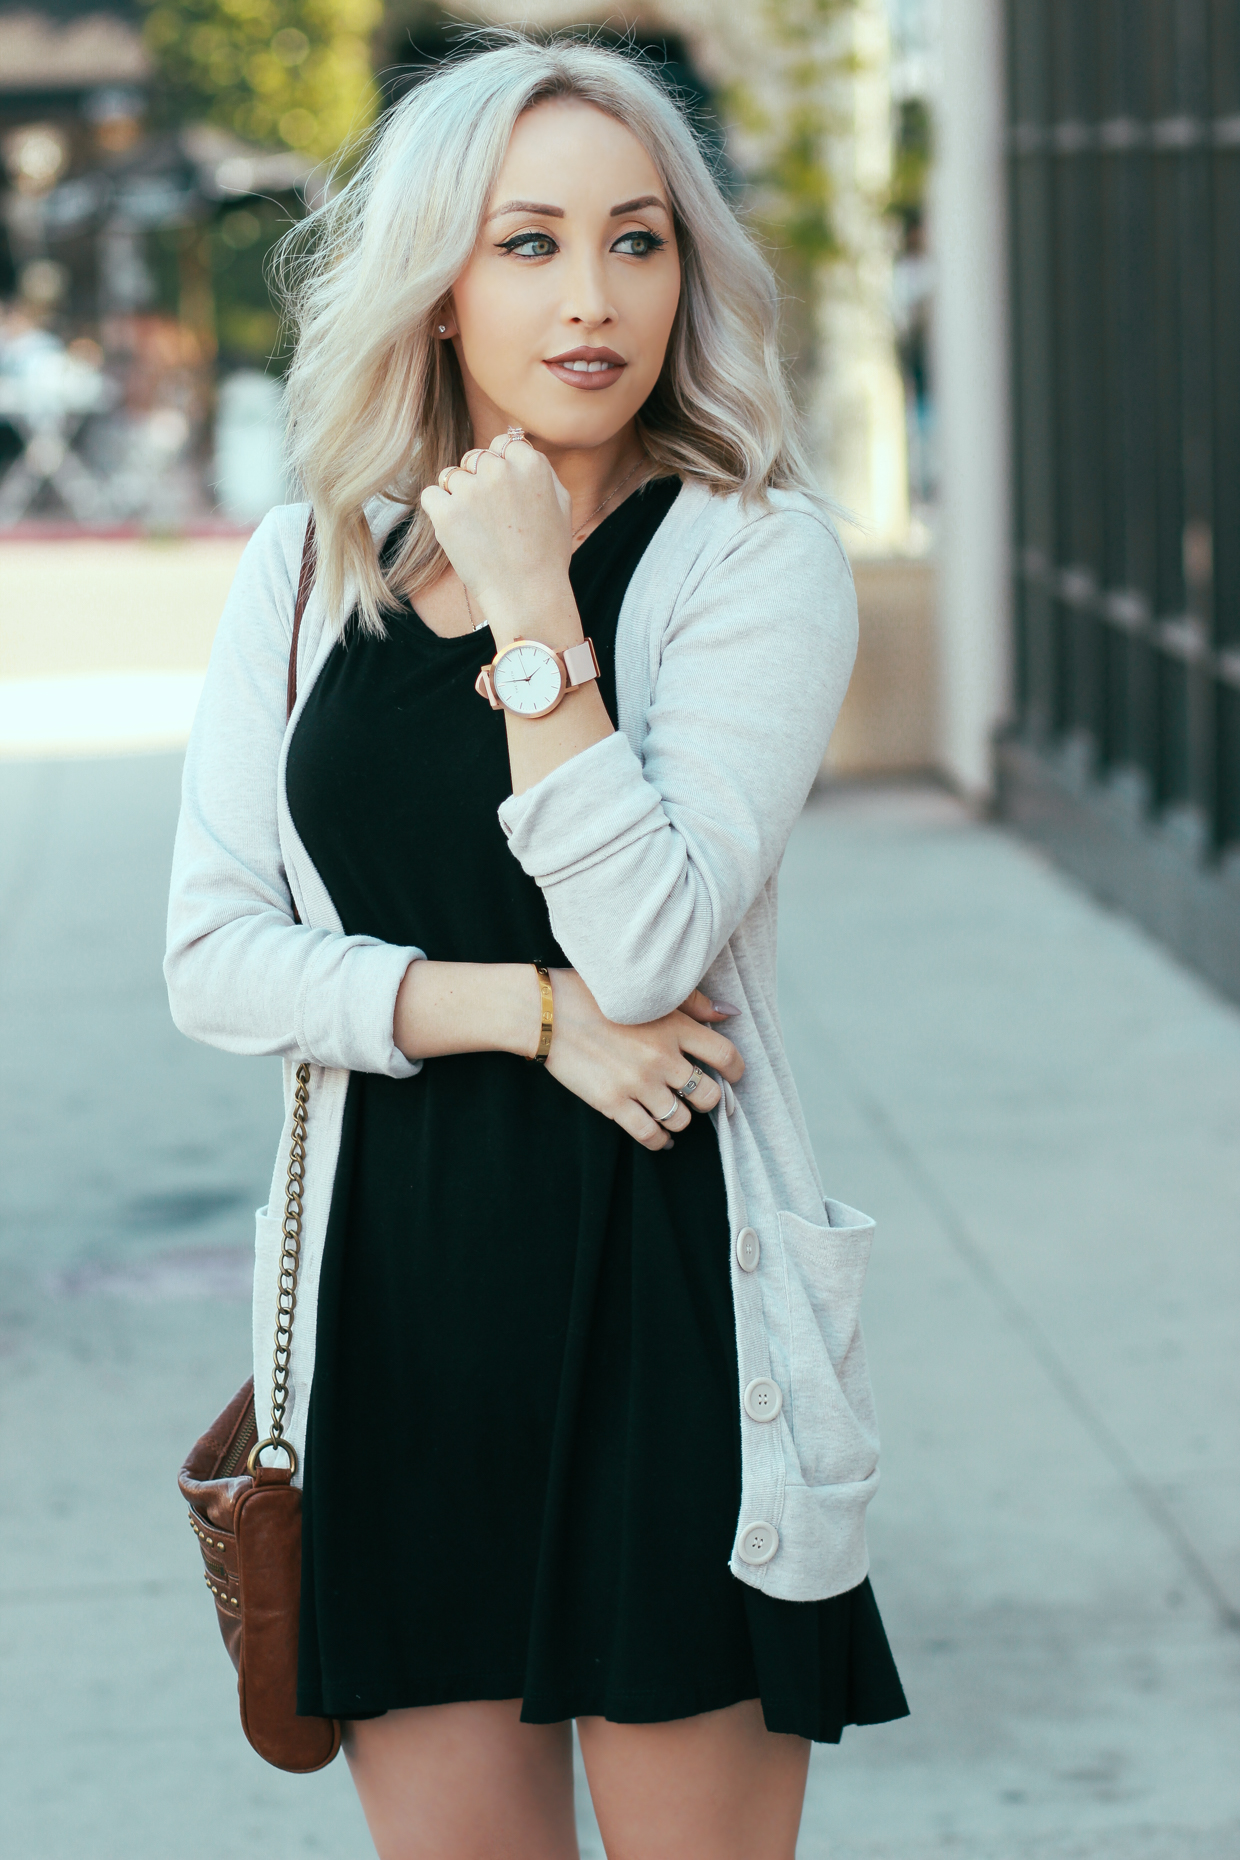 Blondie in the City | Little Black Dress and a Light Sweater | Watch: @the_fifth 